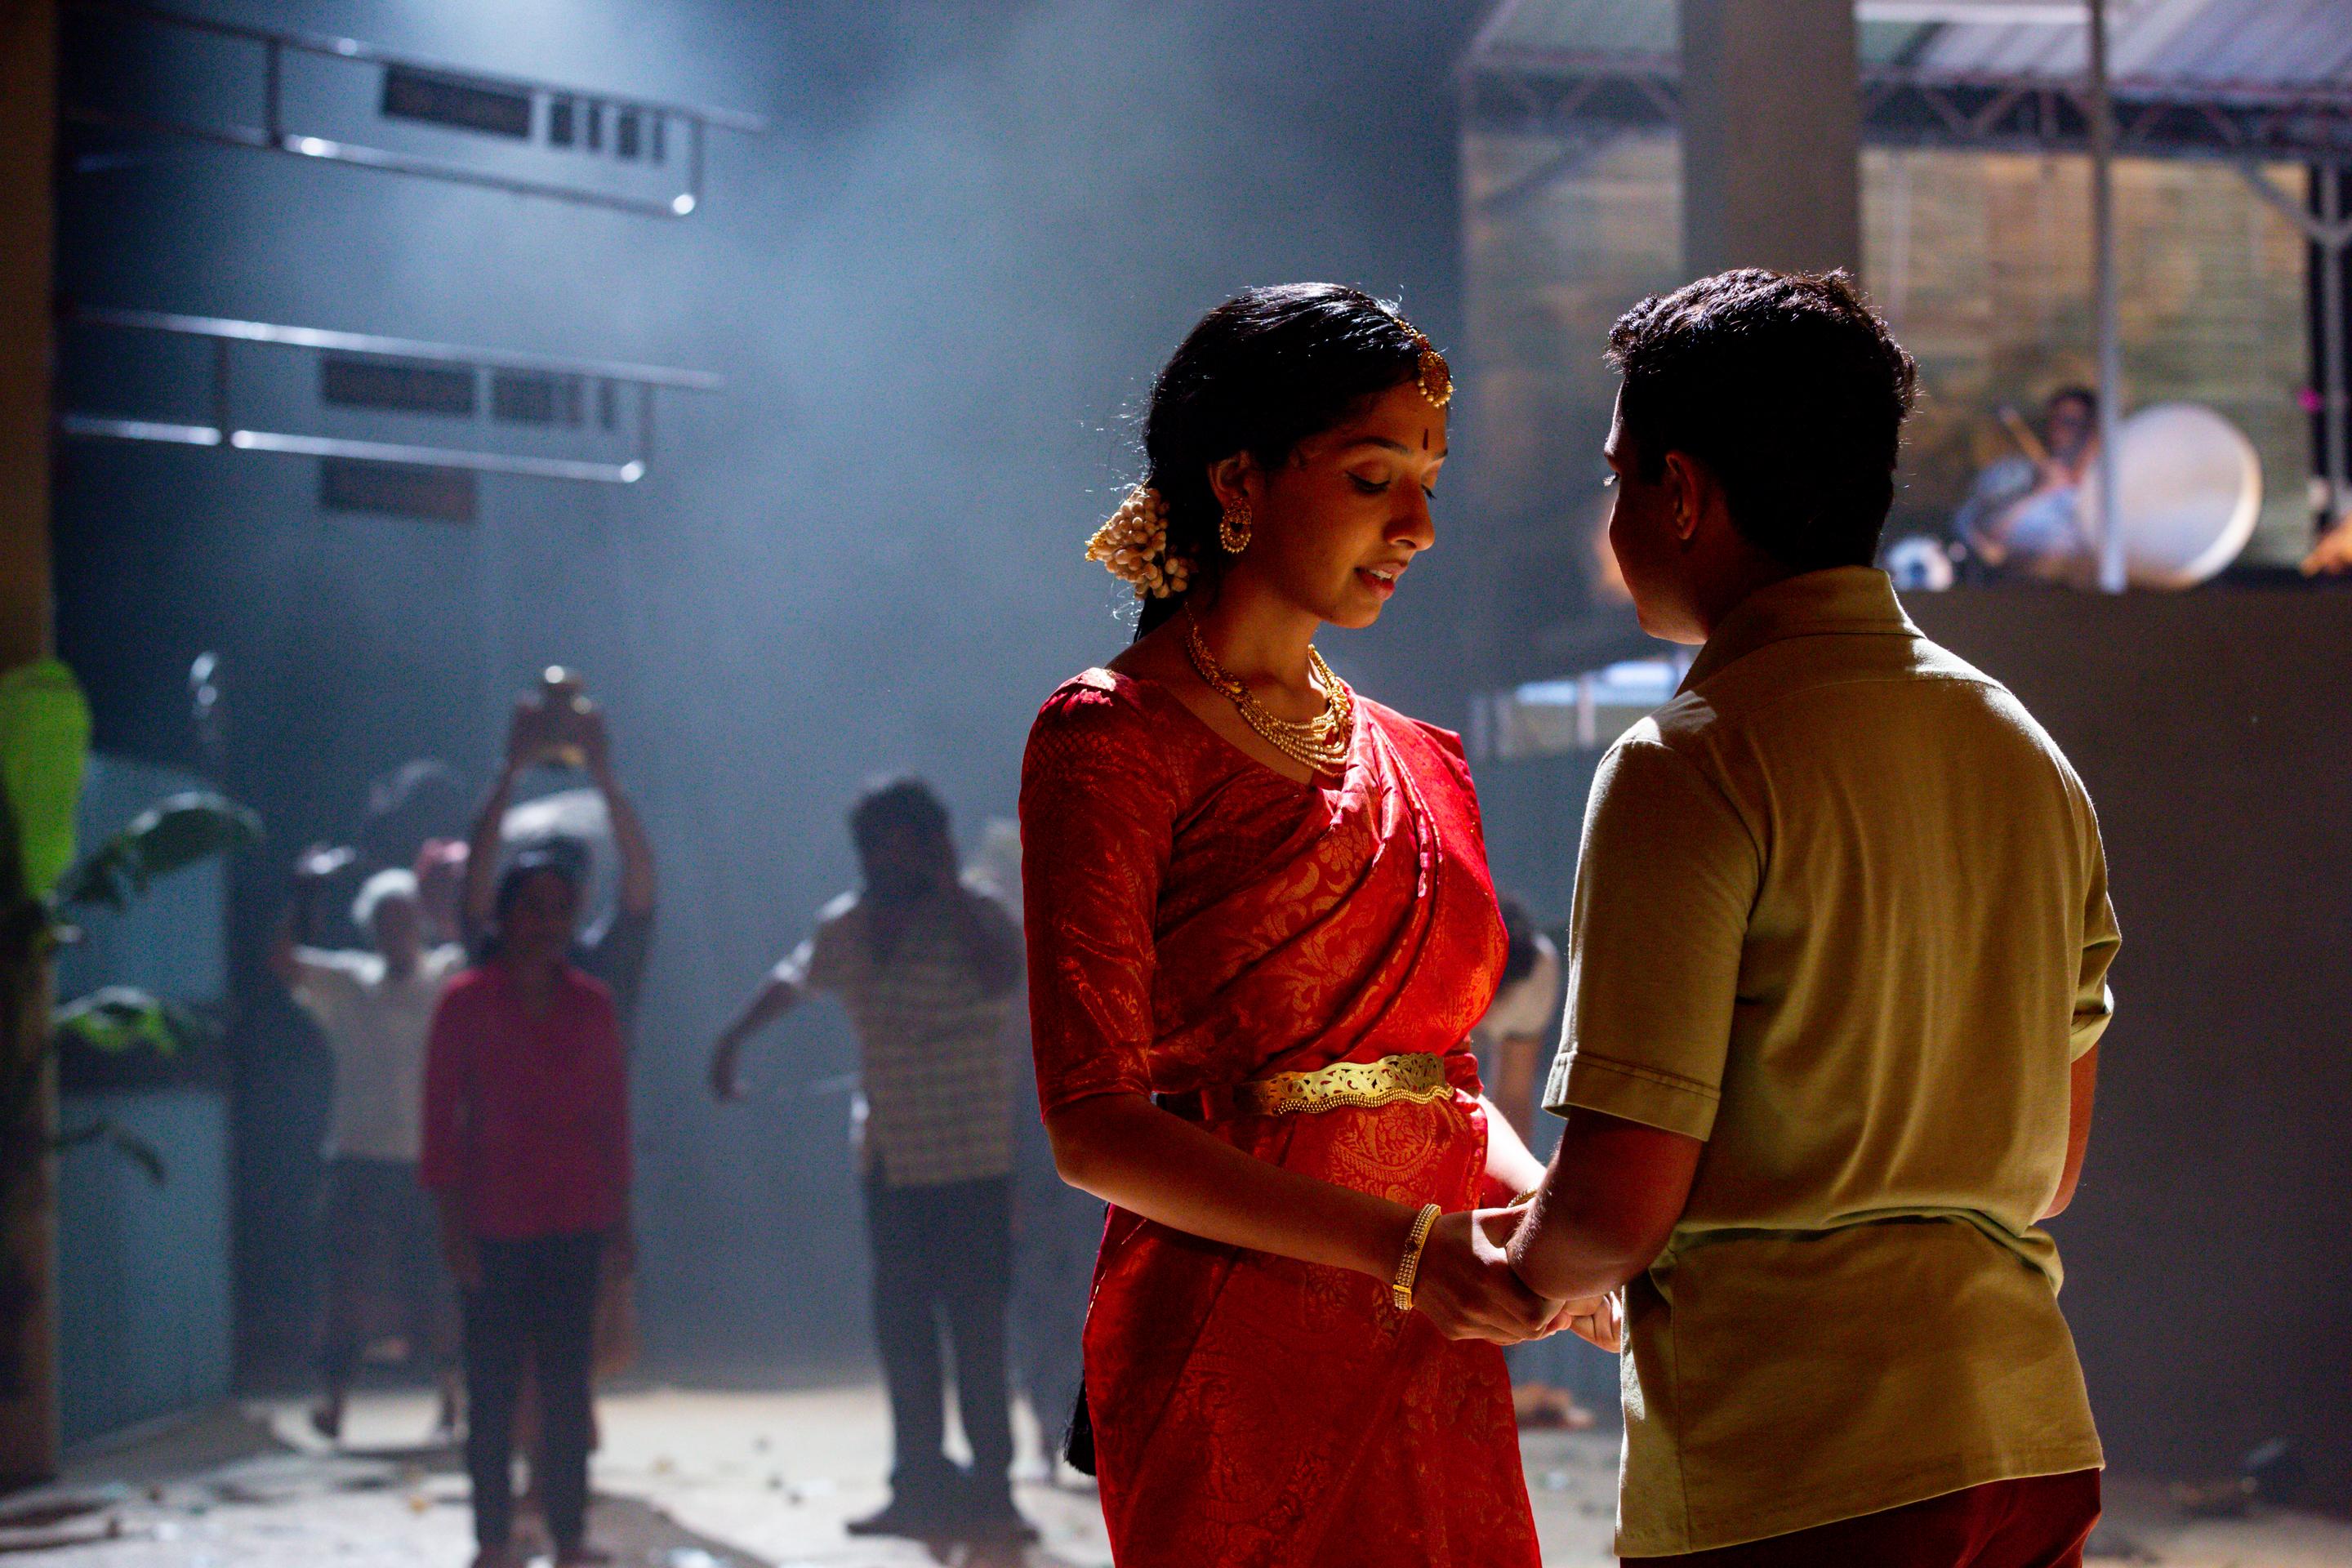 A woman in a red saree and a man in a tan shirt hold hands, sharing an intimate moment on a dimly lit stage, with the crew working in the background.